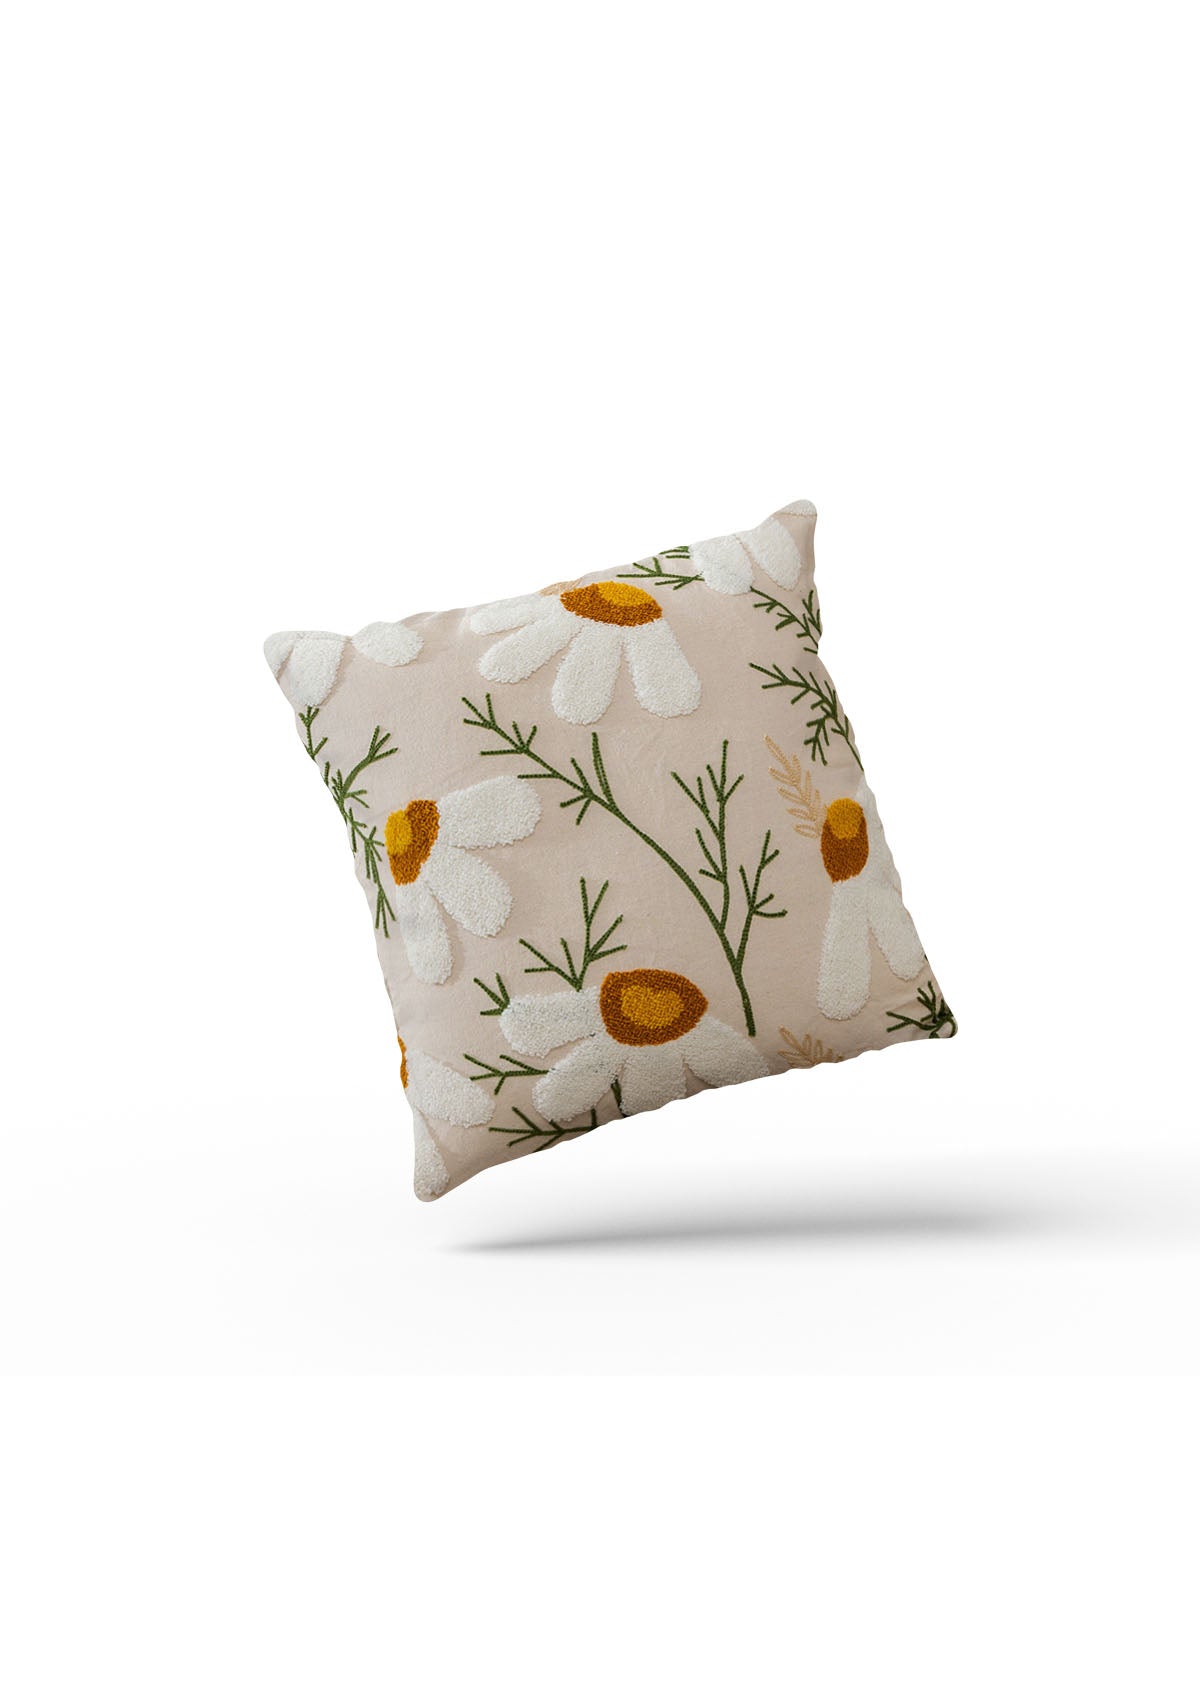  Floral design on a cream cushion cover, creating a soft and inviting ambiance